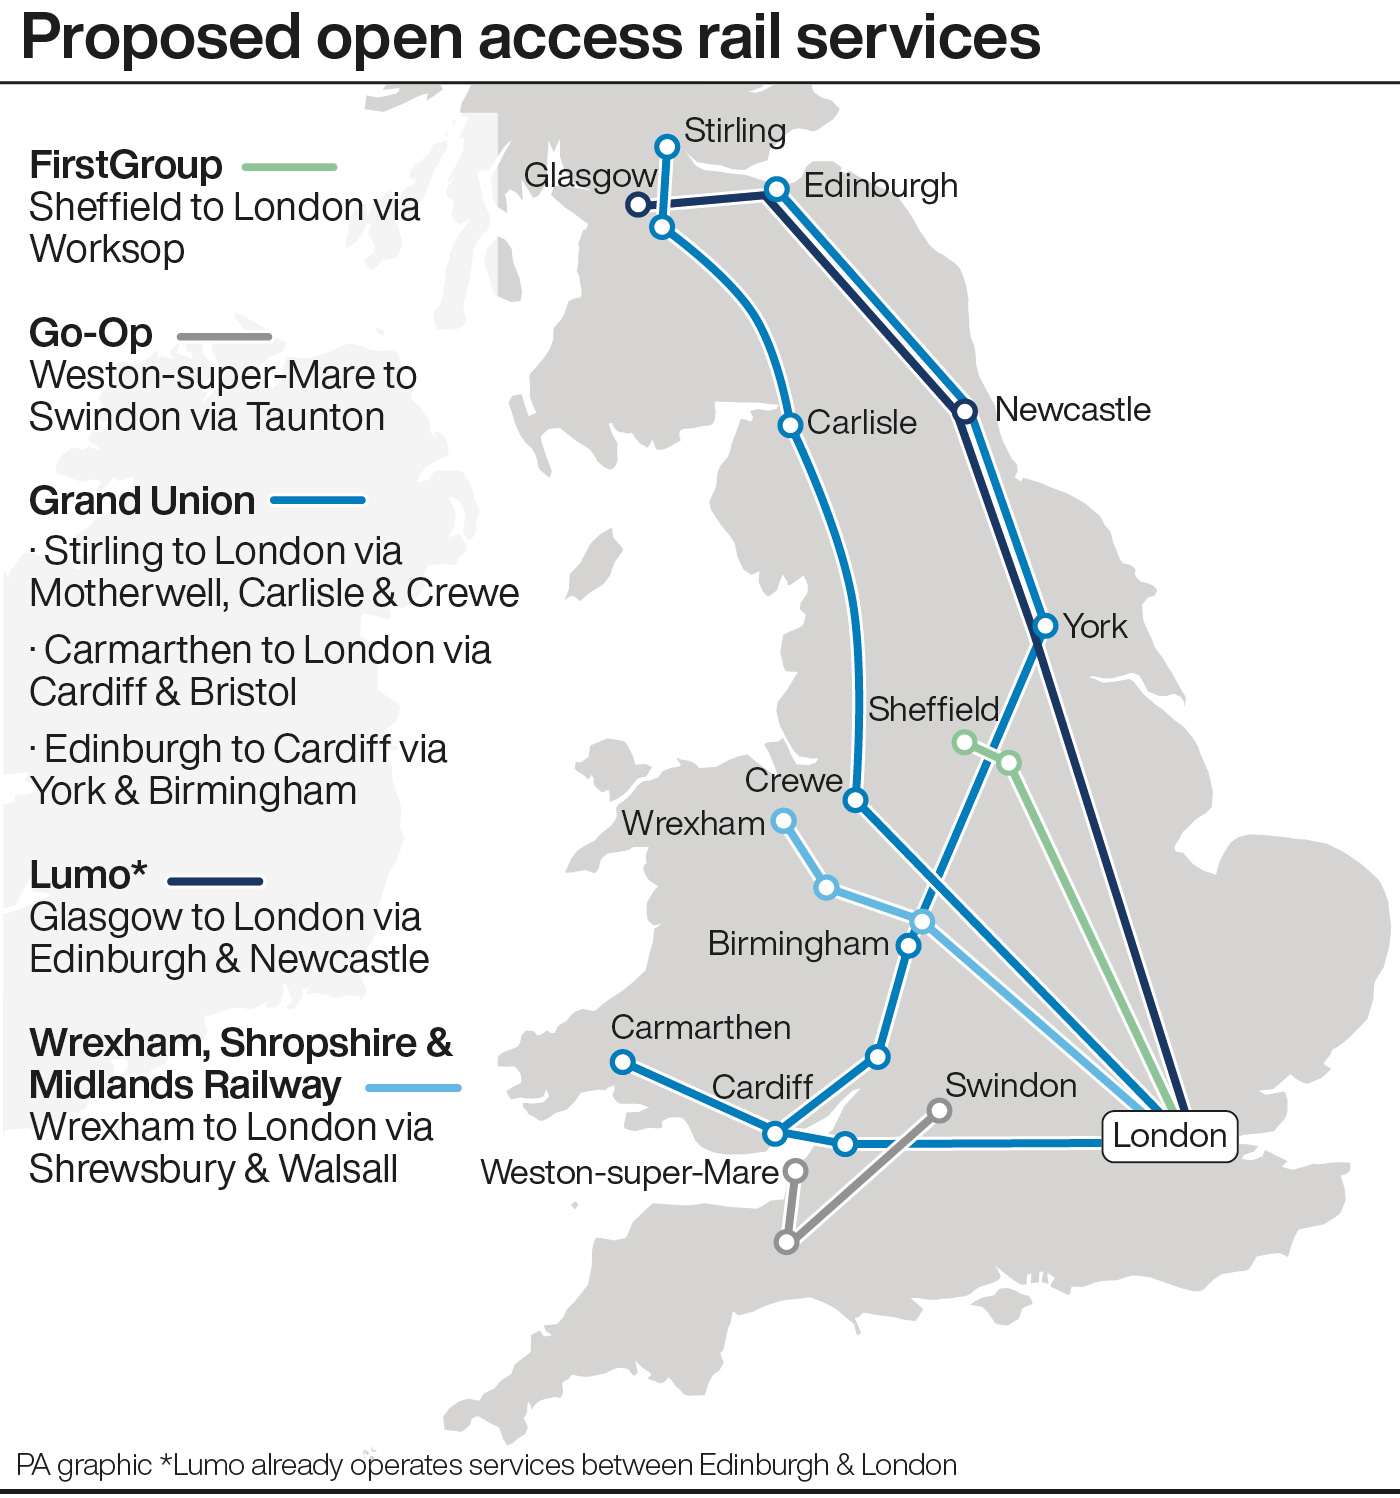 A graphic showing proposed open access rail services